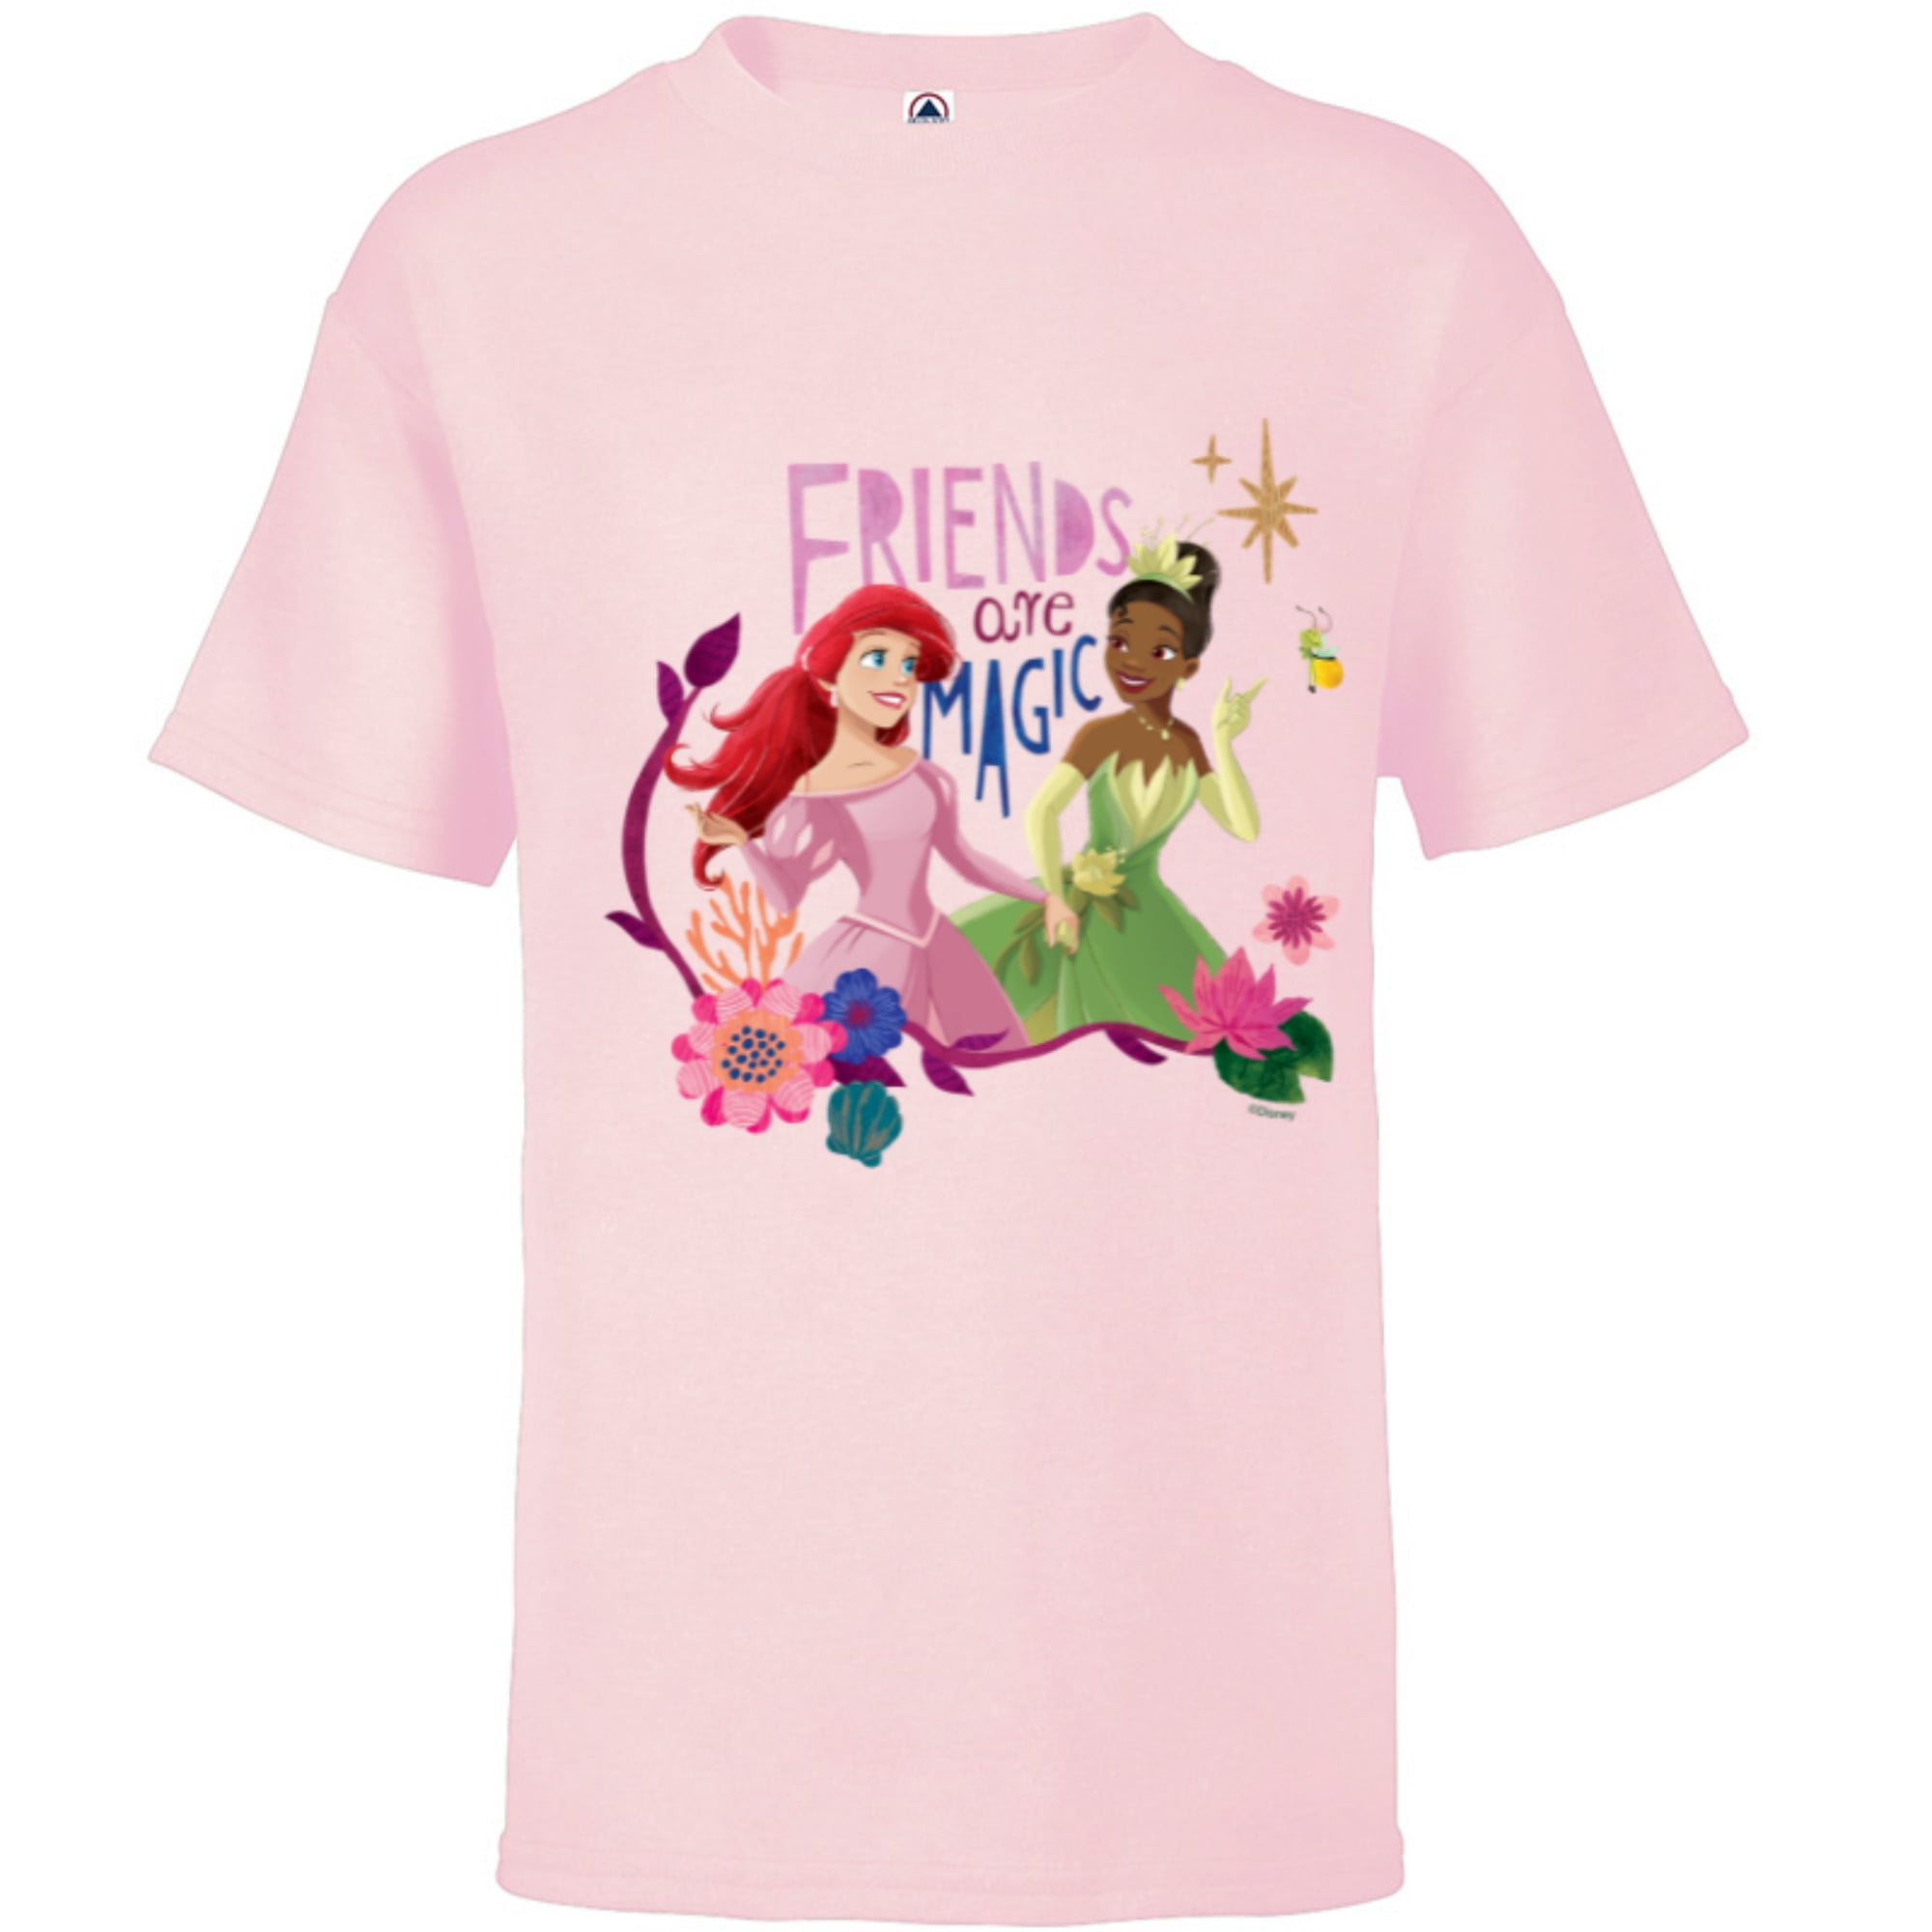 Disney Princess Ariel and Tiana Kids for Customized-White Short are Friends Magic - - Sleeve T-Shirt